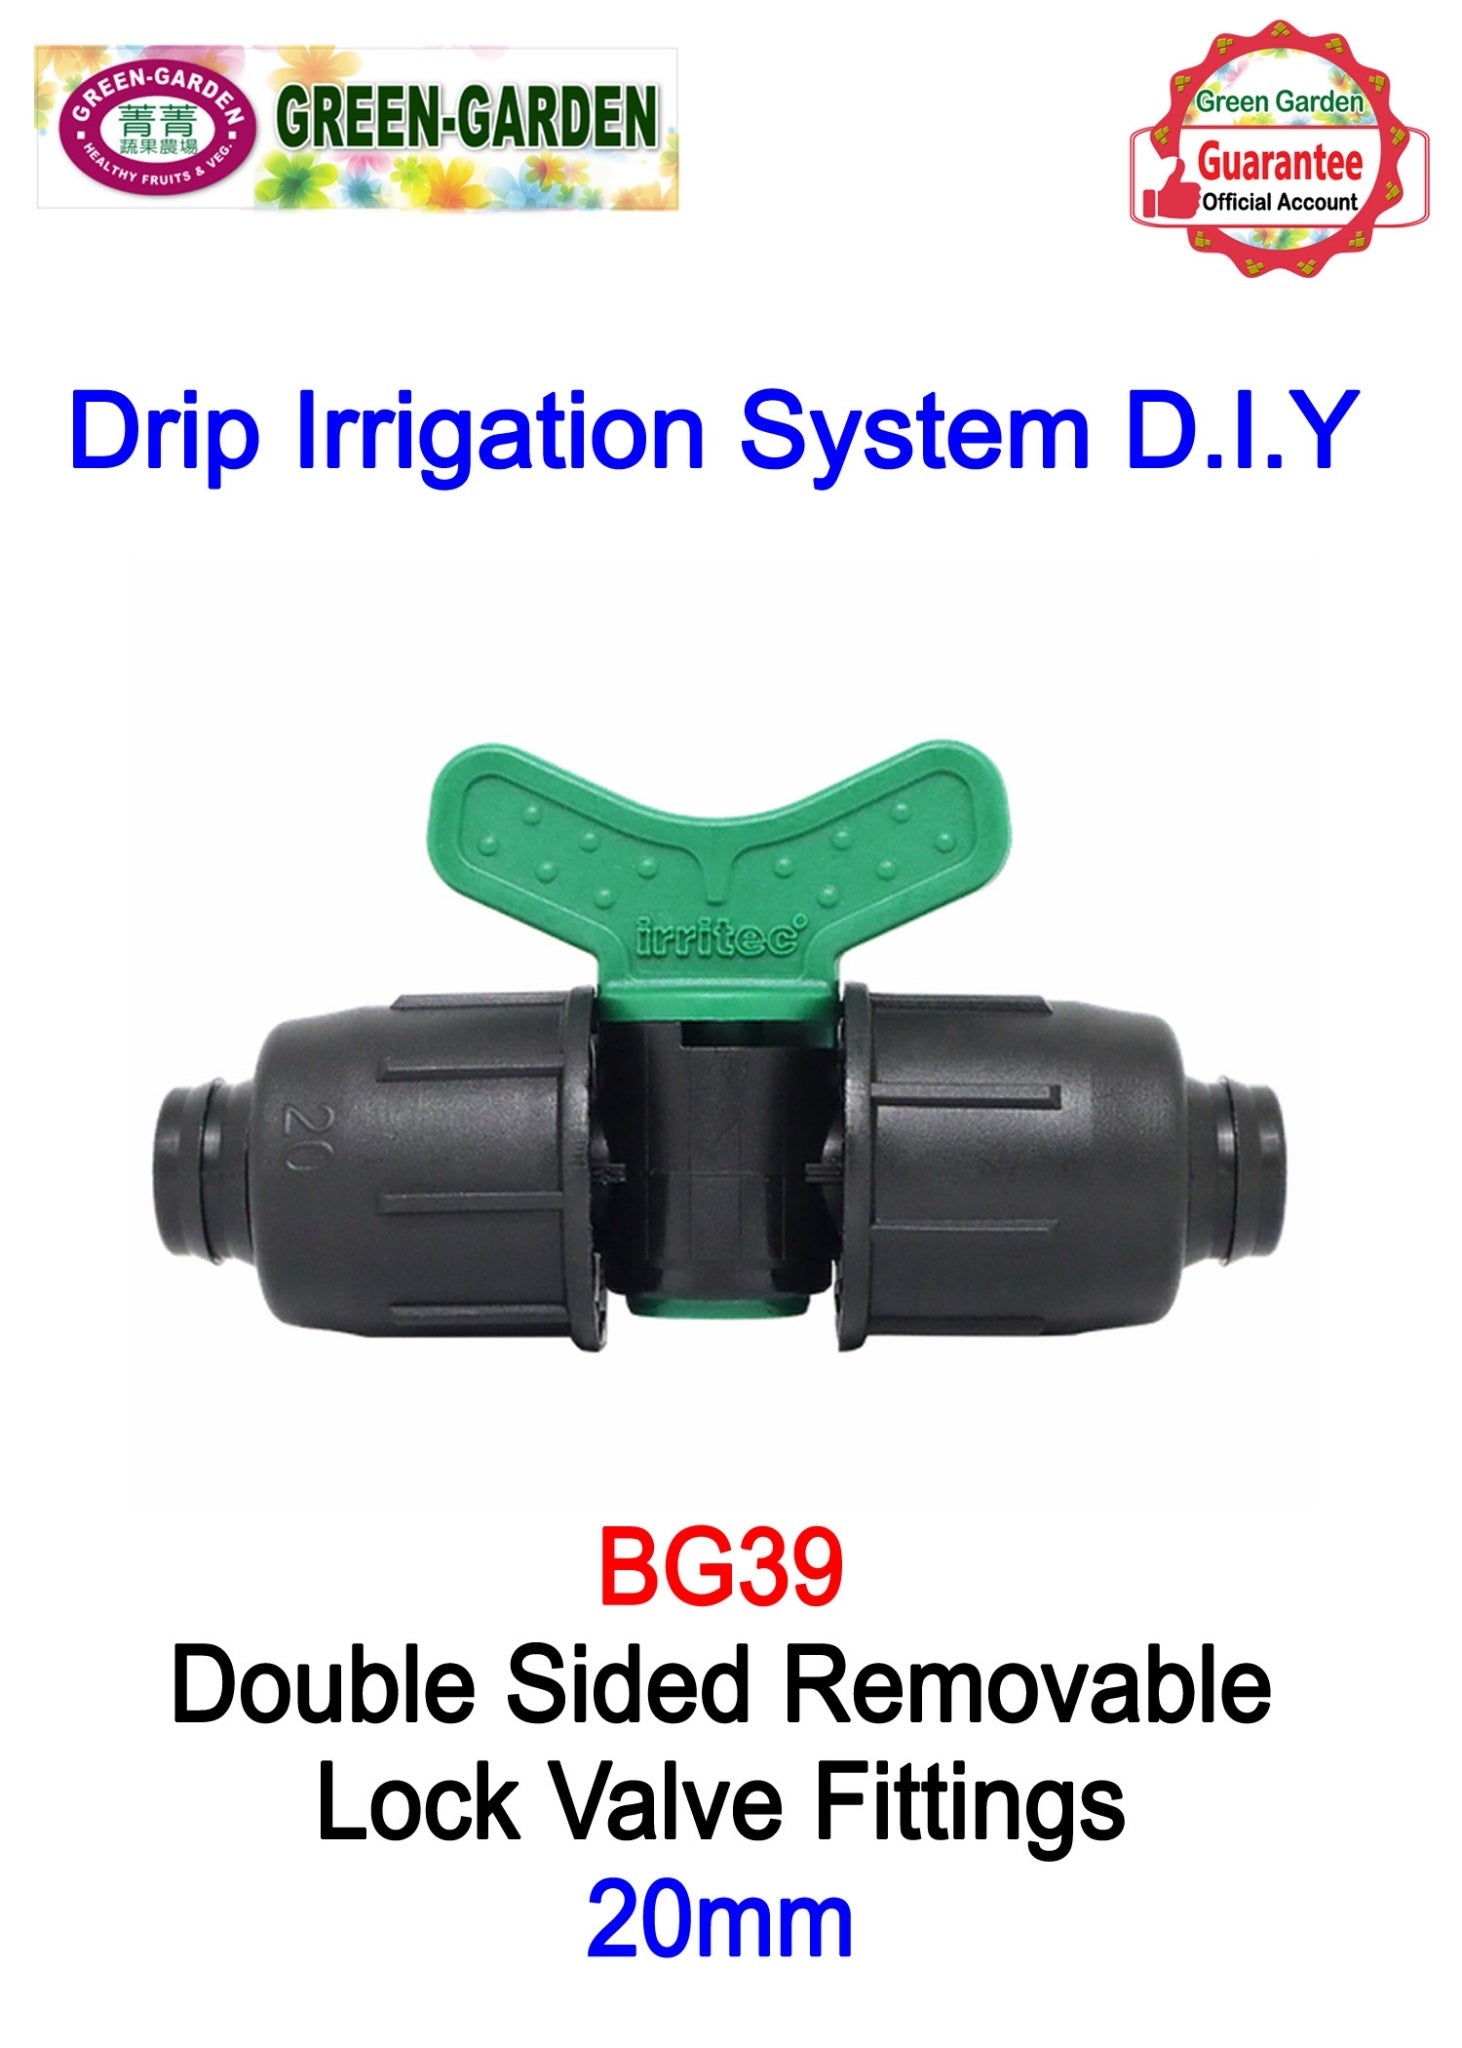 Drip Irrigation System - 20mm double-sided detachable lock valve connector BG39